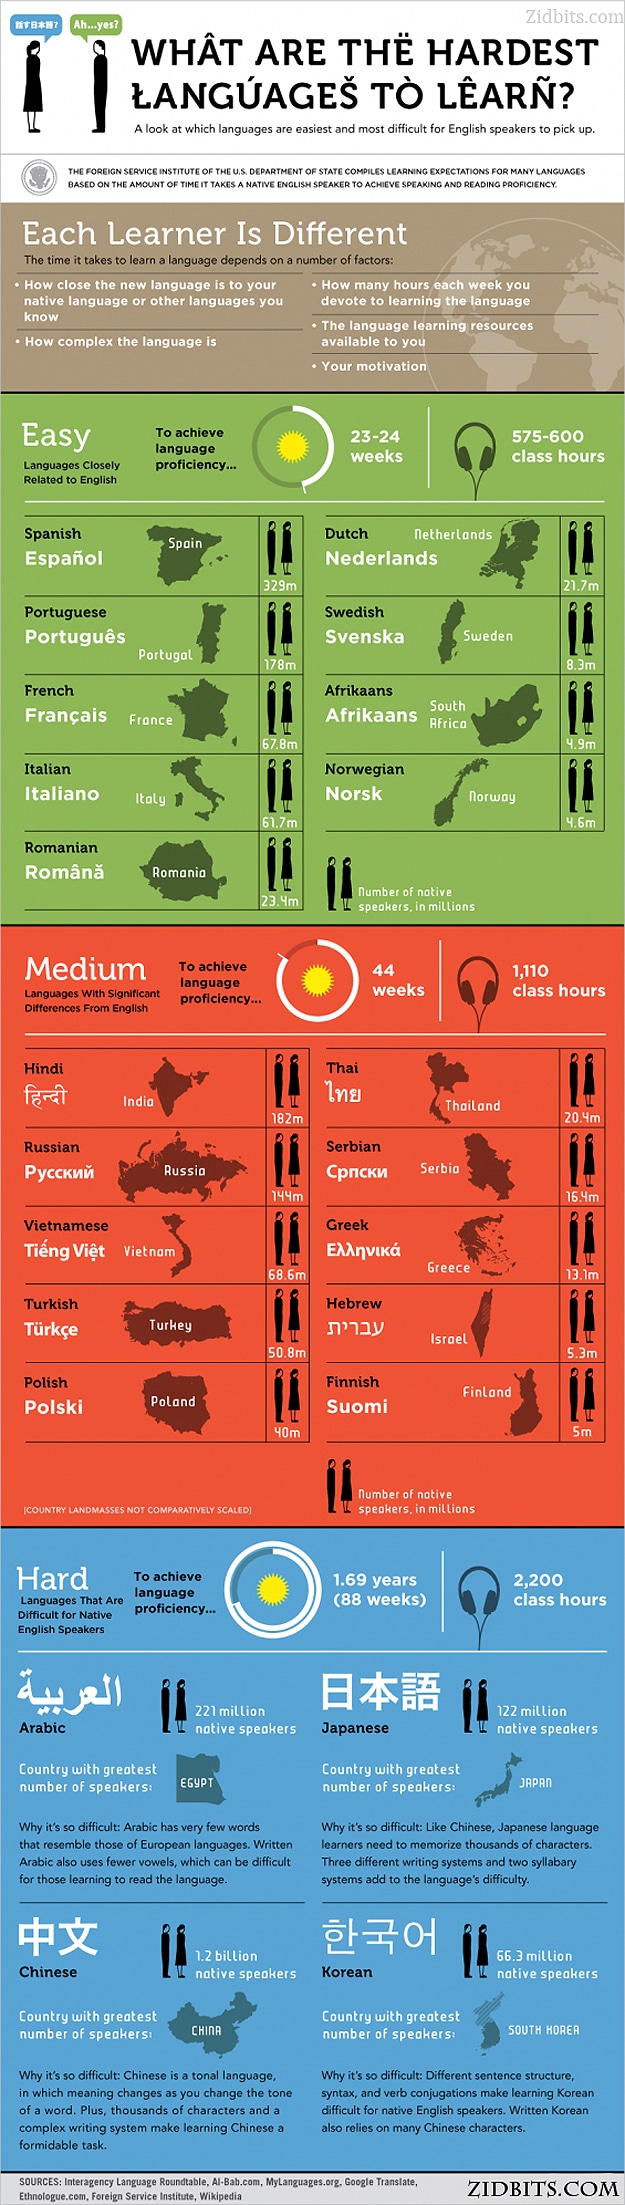 Brain Food: The Hardest Languages To Learn